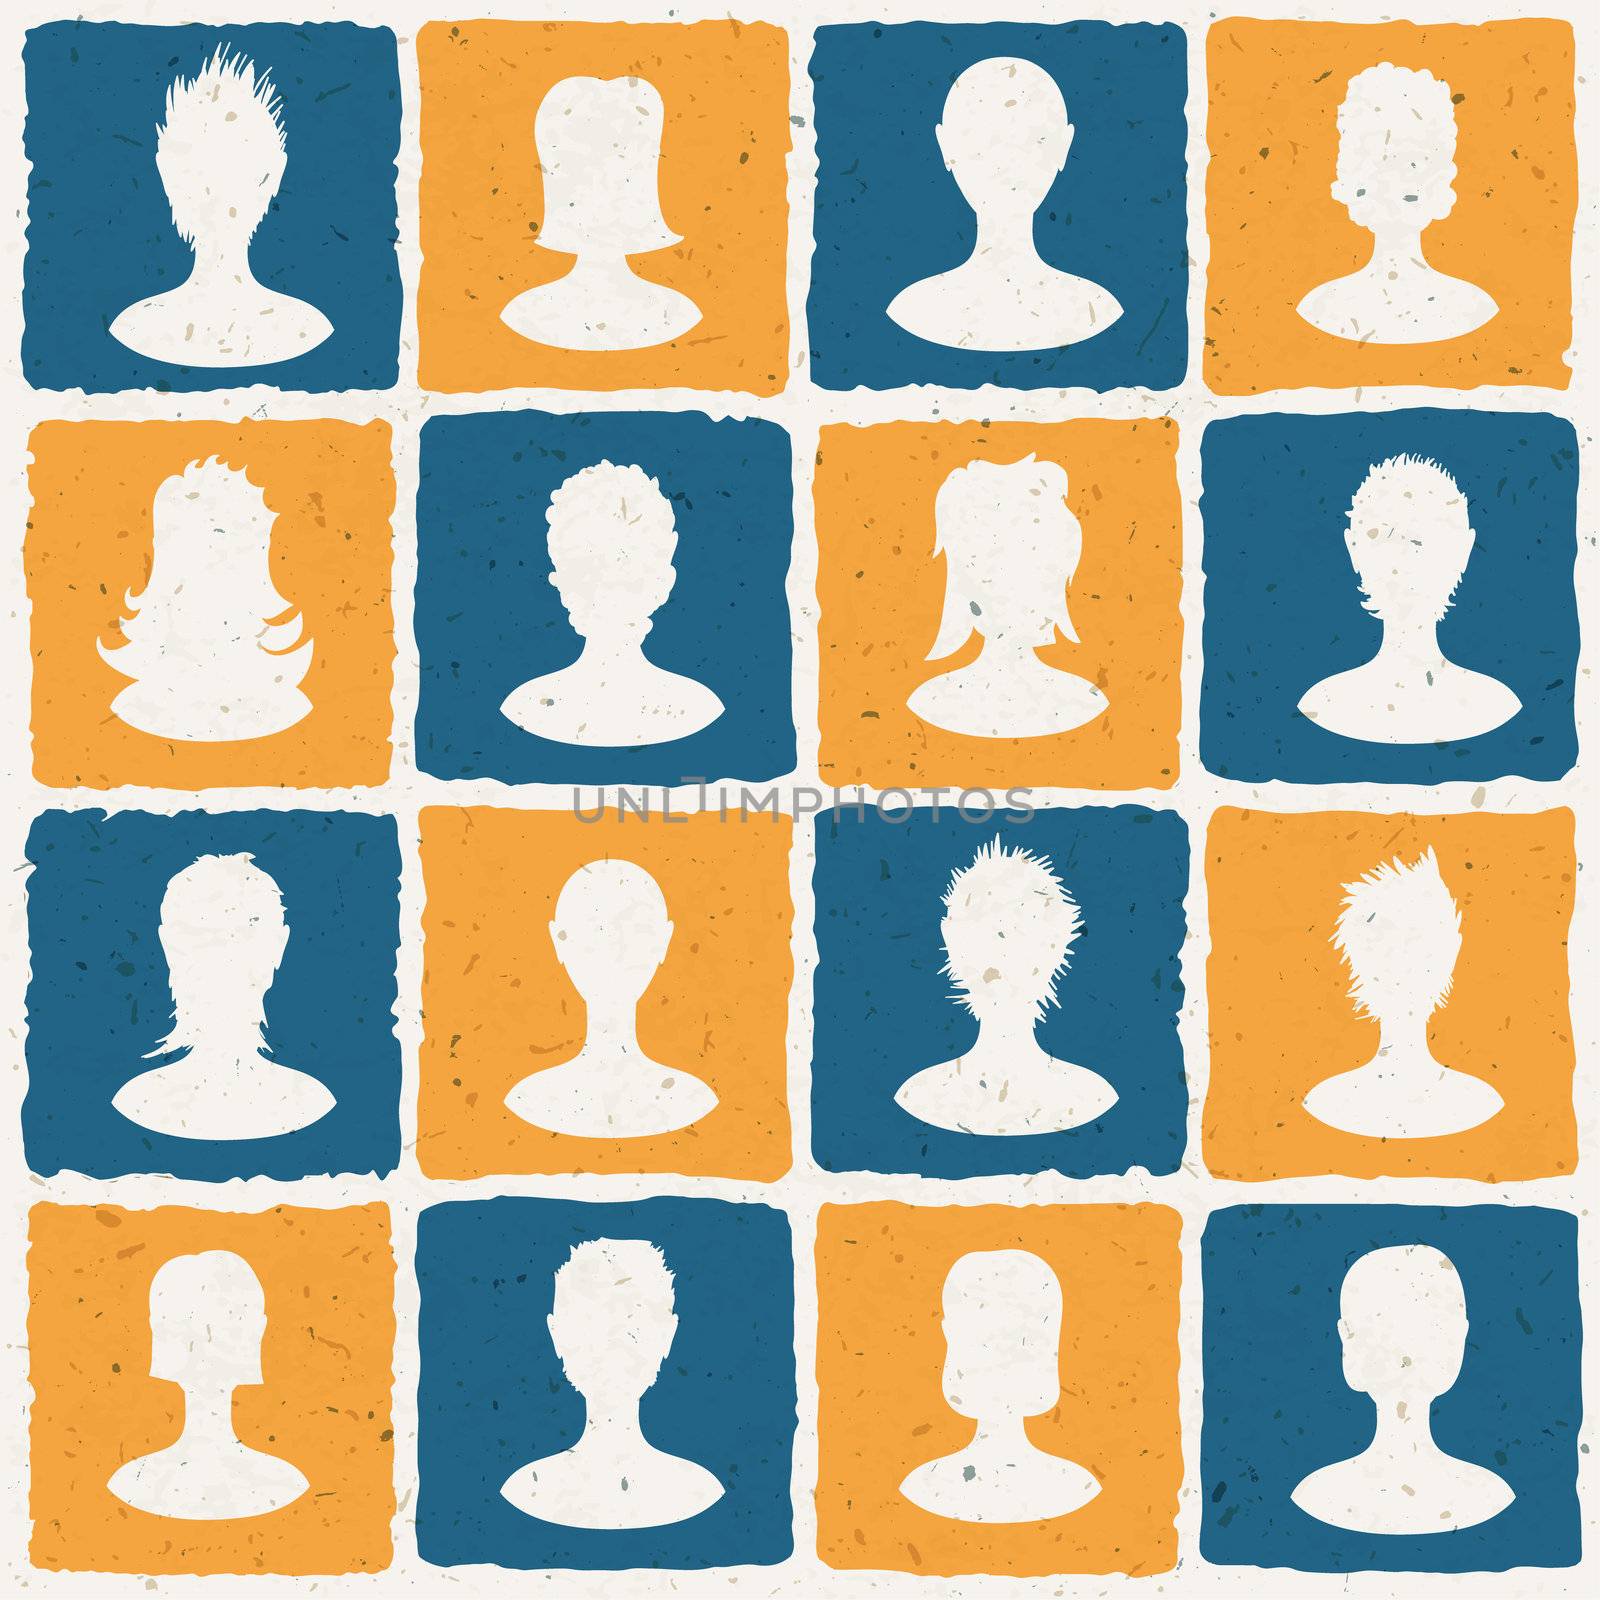 Portraits of many people. Social network concept illustration. V by pashabo